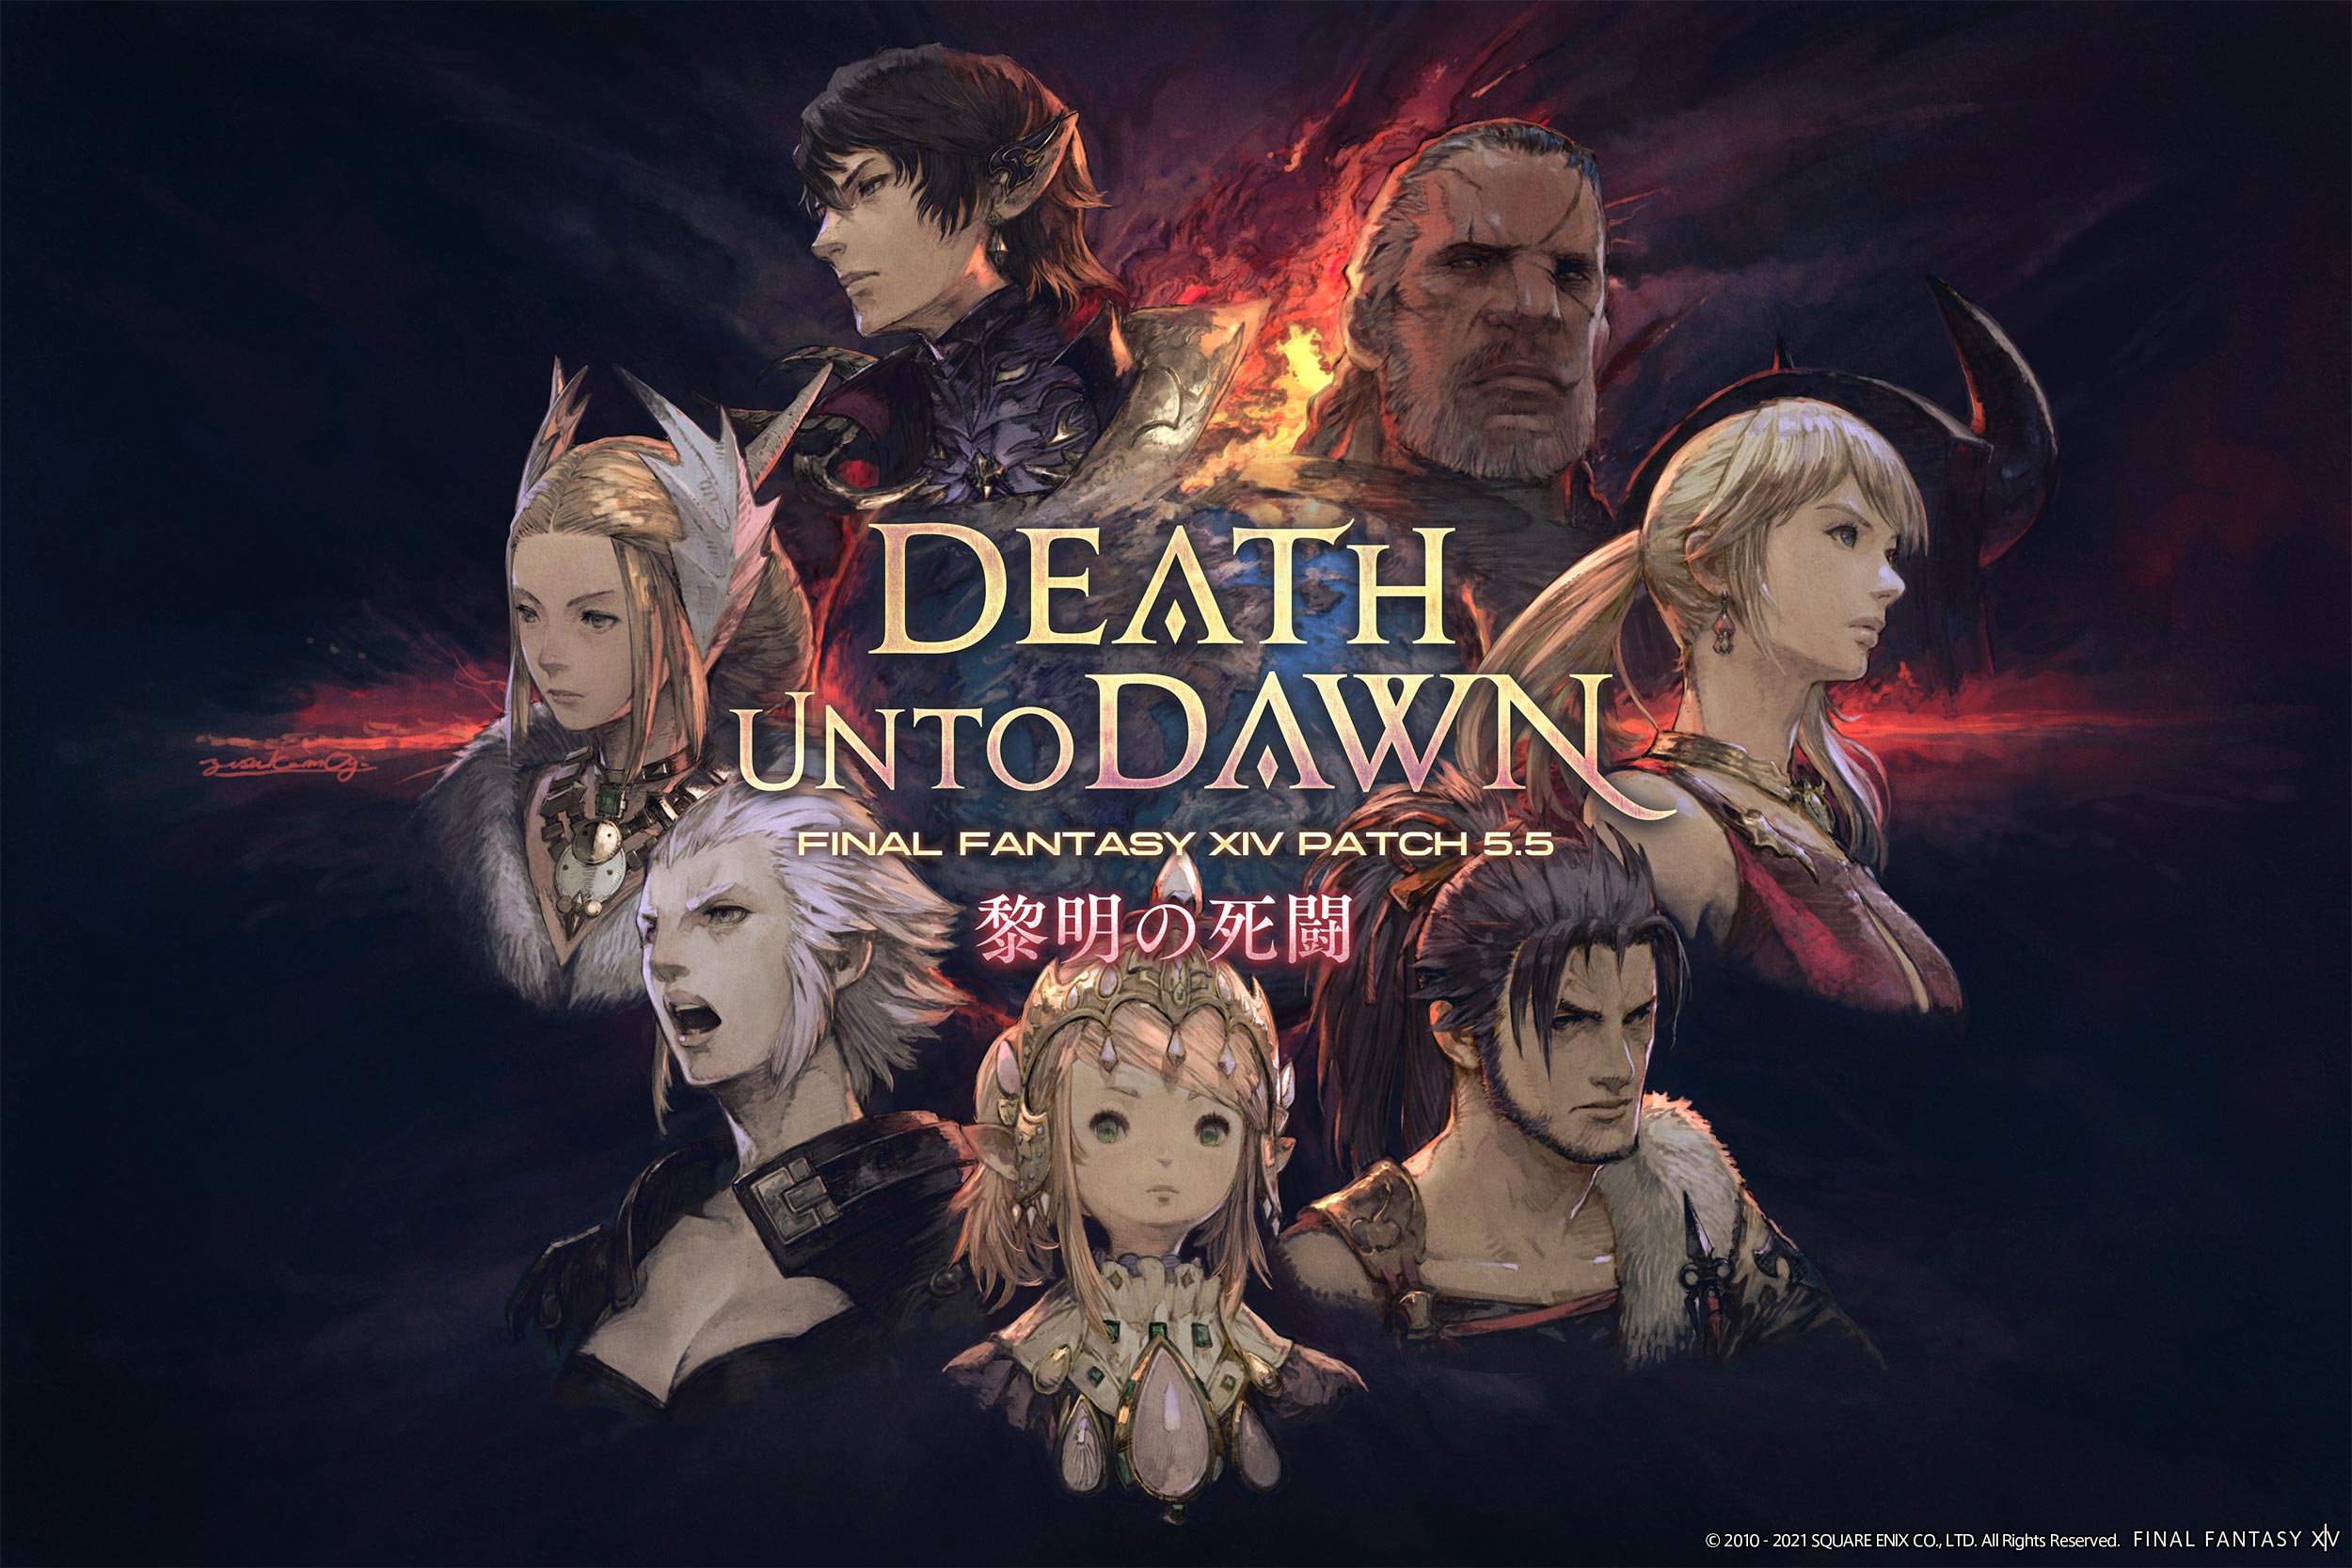 The key art from Final Fantasy 14’s patch 5.5, Death Unto Dawn. It features busts of several key NPCs, like Nanamo, Hien, and Aymeric, circled around the text logo.